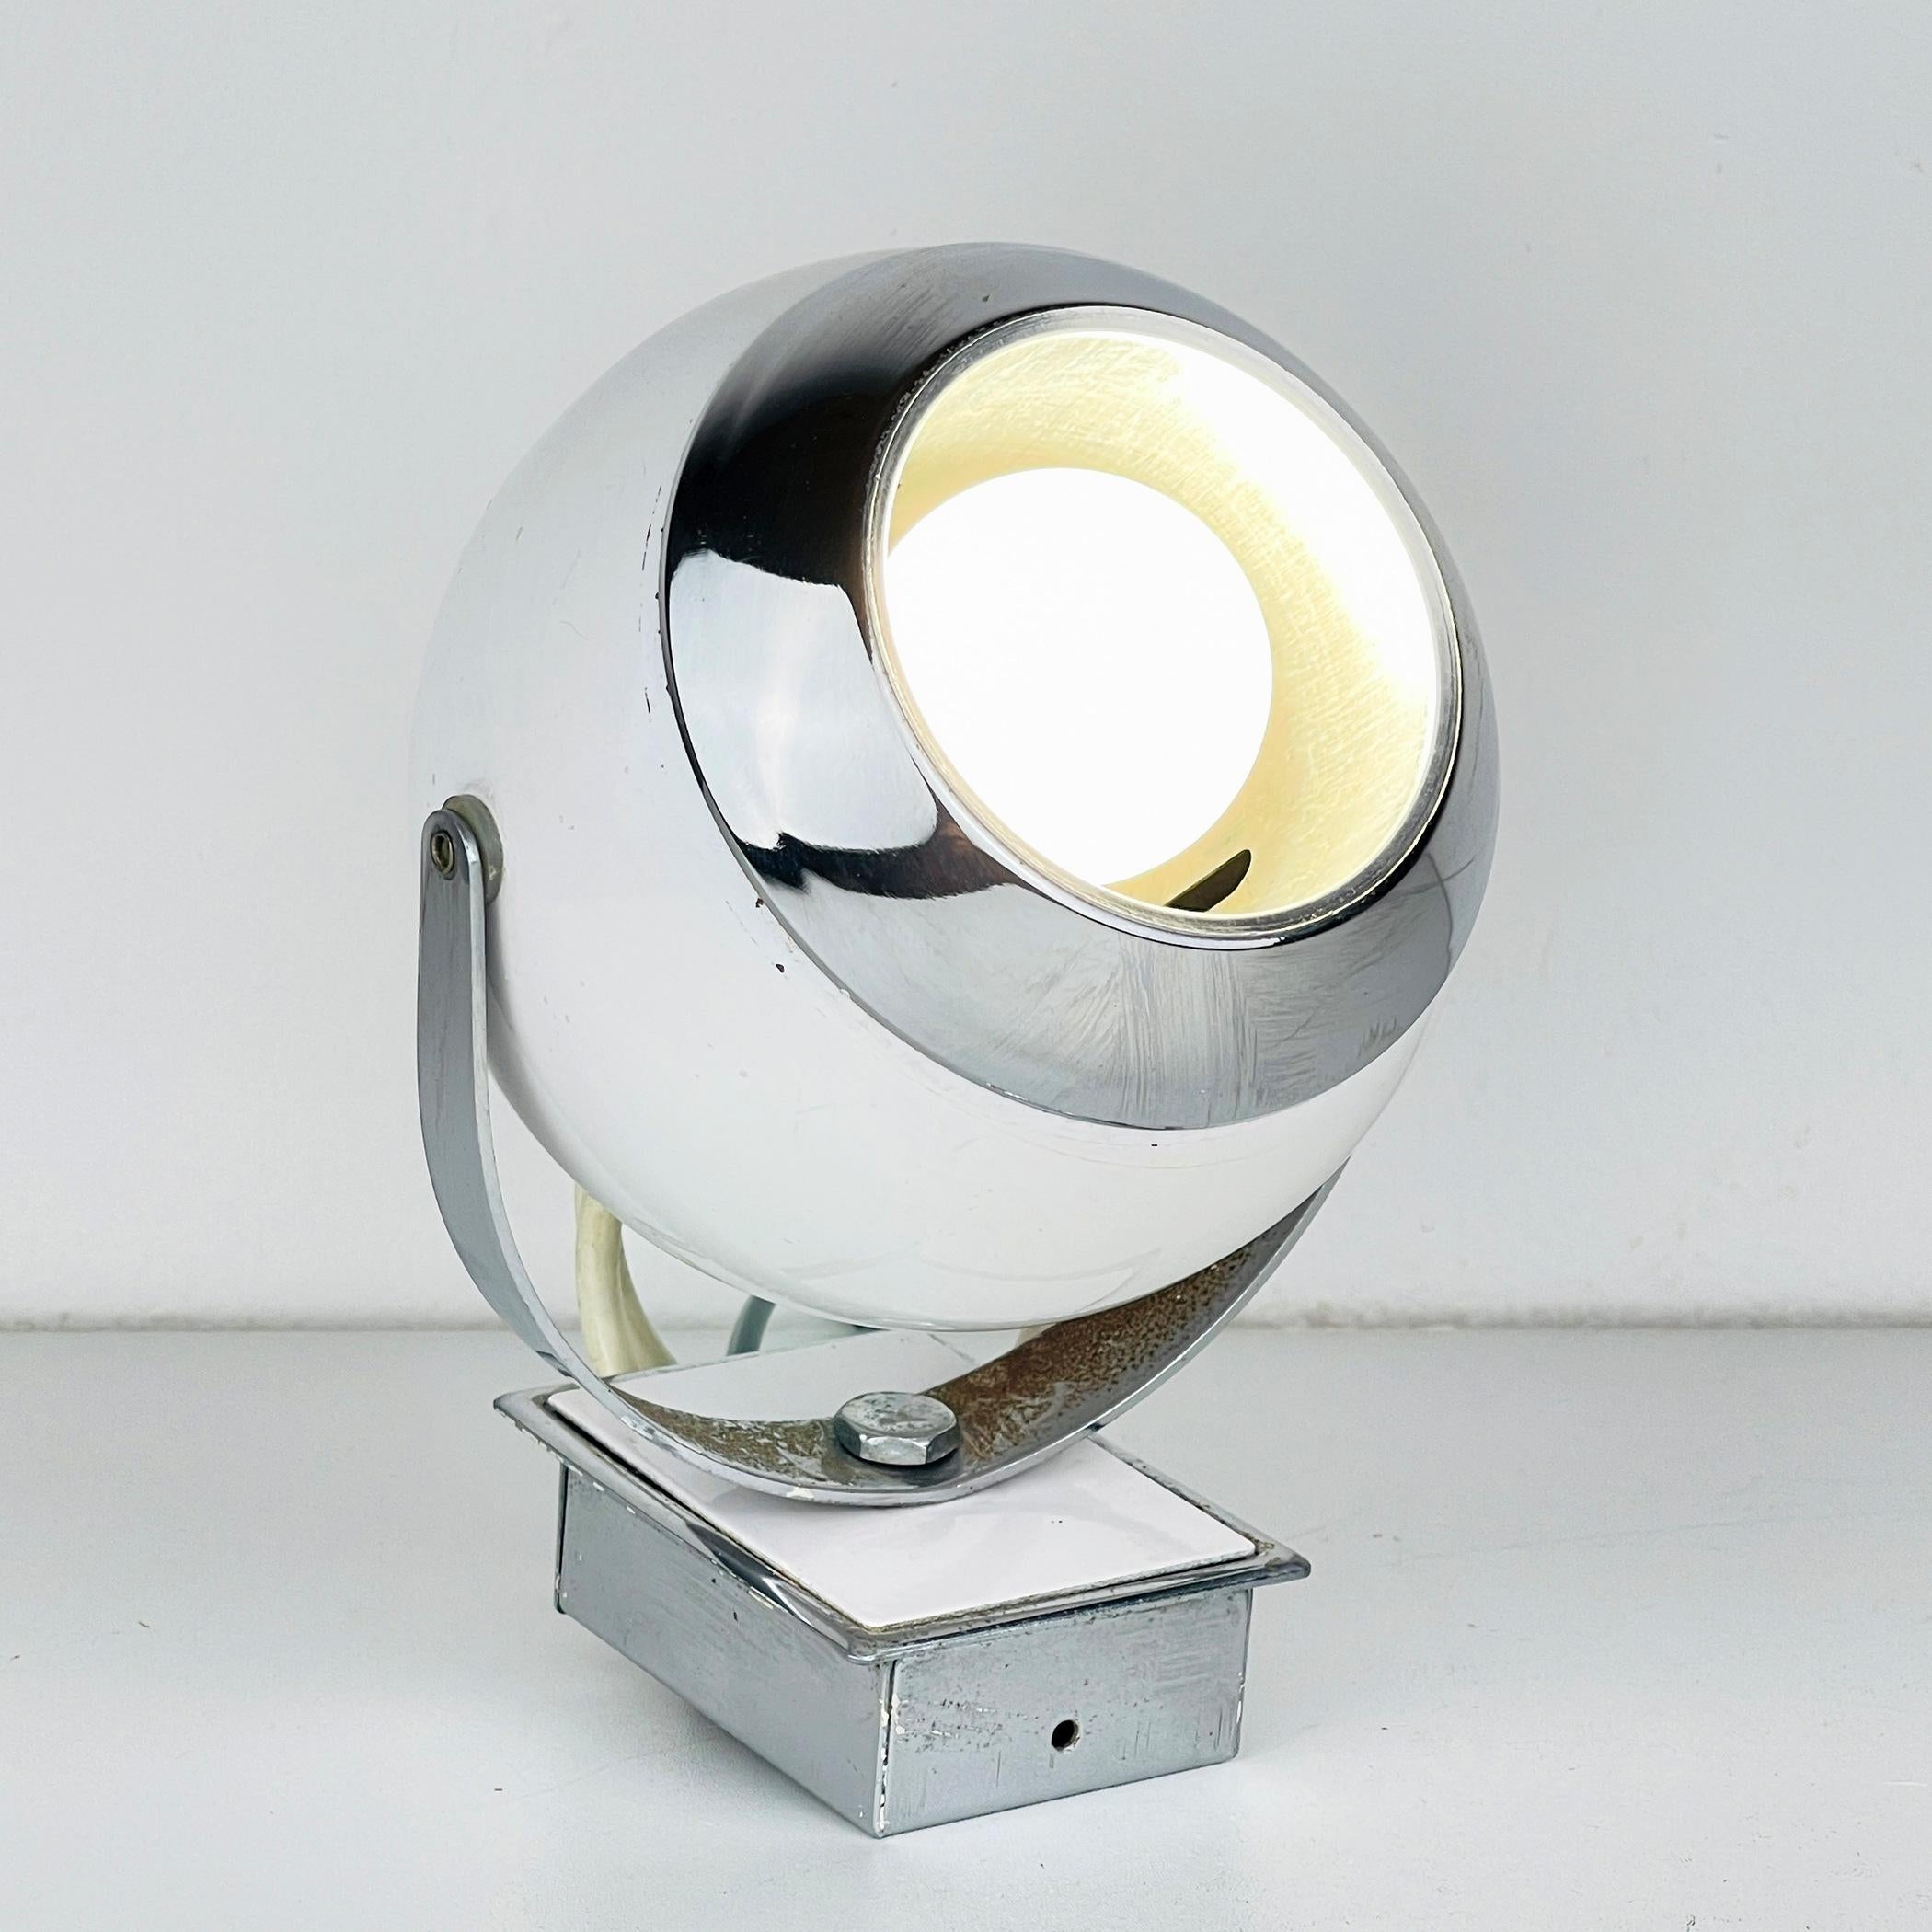 Introducing an exceptional vintage wall lamp from the 1960s, straight from the heart of Italian design. This lamp is a true testament to the ingenuity of the space age. This stylish wall lamp, affectionately known as the 